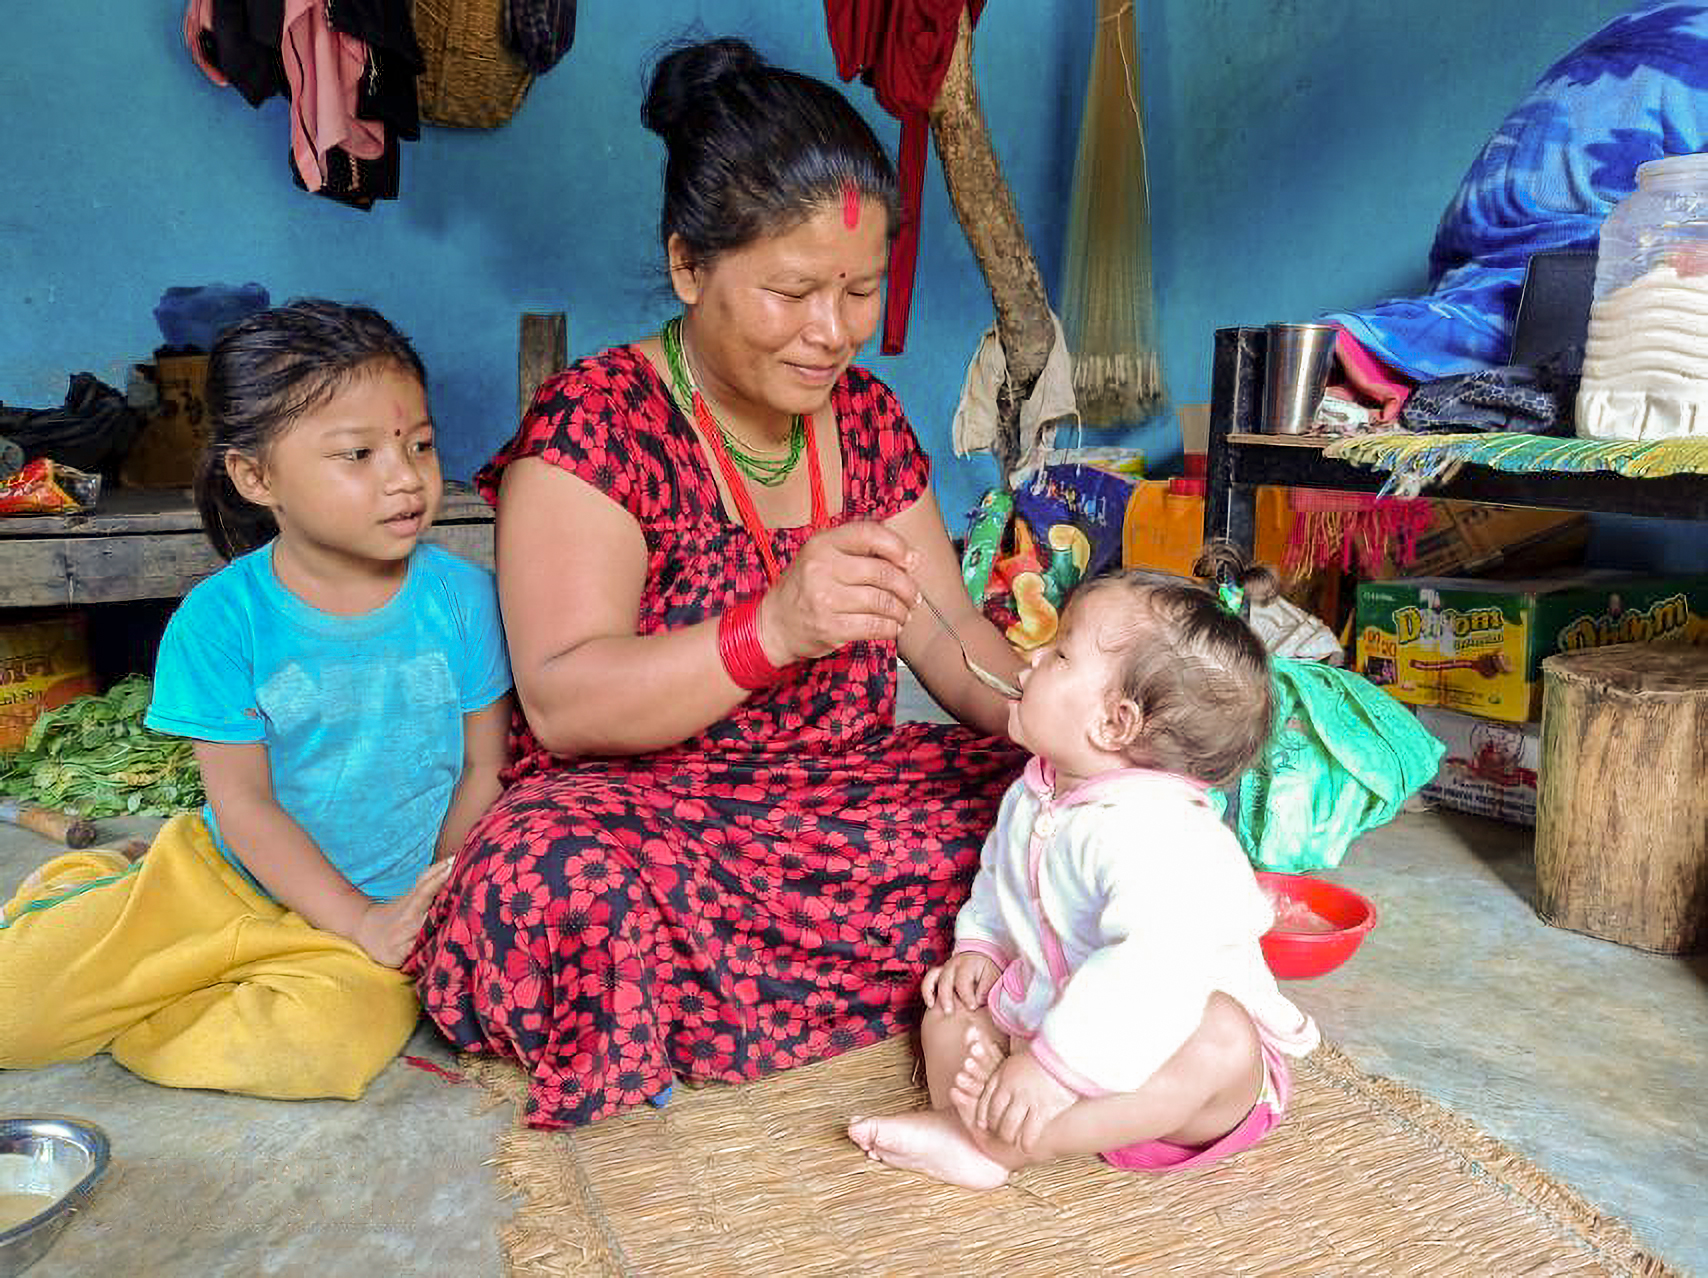 Sumitra Chepang feeds a spoonful of super porridge to her 10-month-old daughter Promisa in their home in the village of Syammaidada, Nepal, while her other daughter, Ritu Chepang, watches.